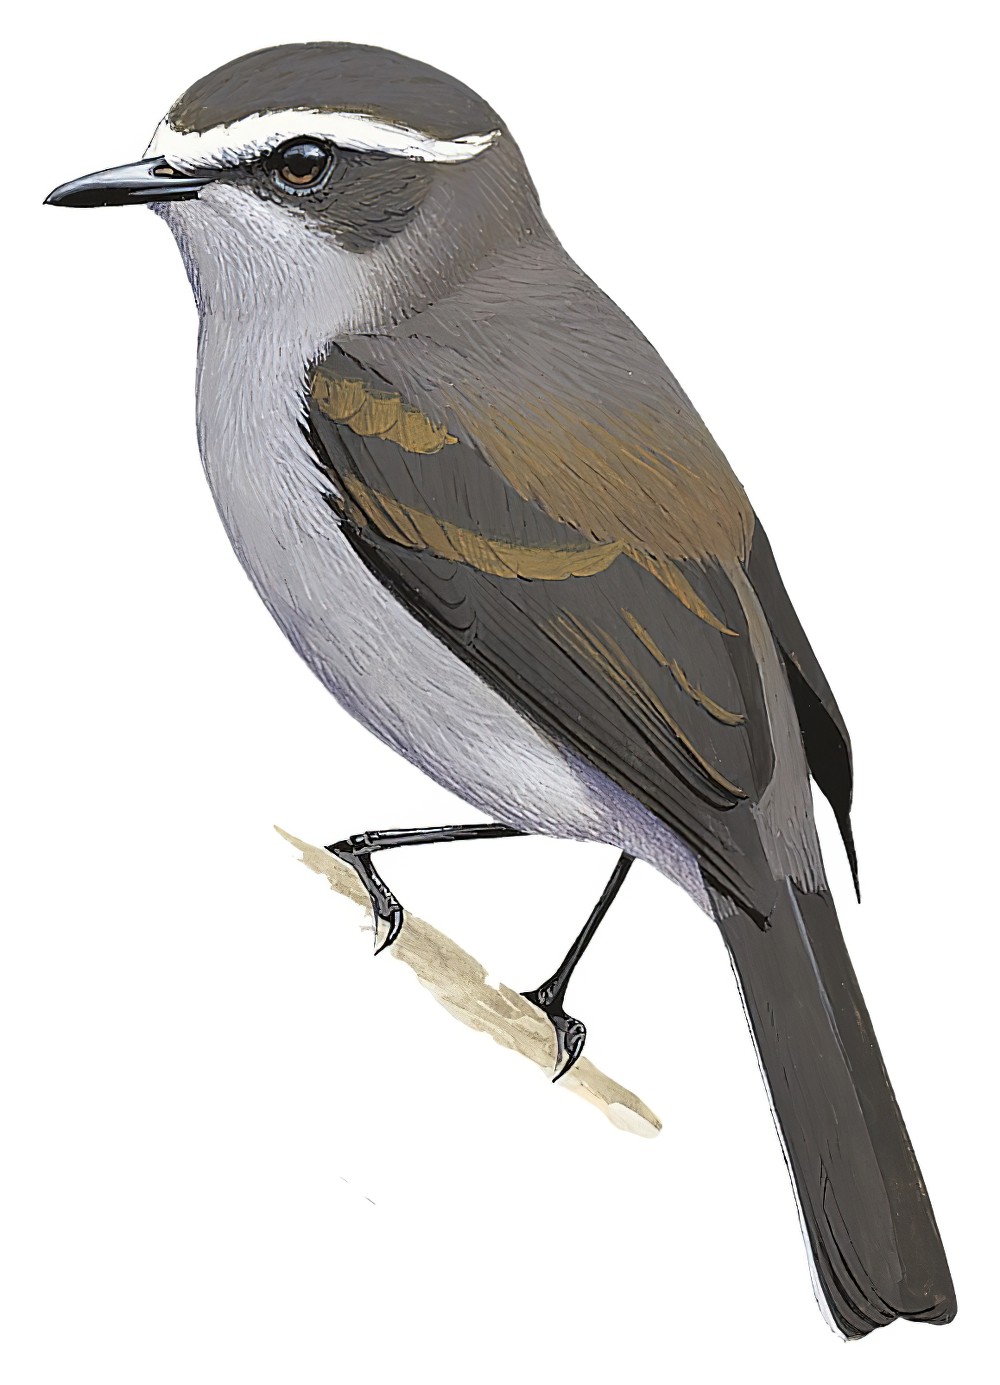 White-browed Chat-Tyrant / Ochthoeca leucophrys